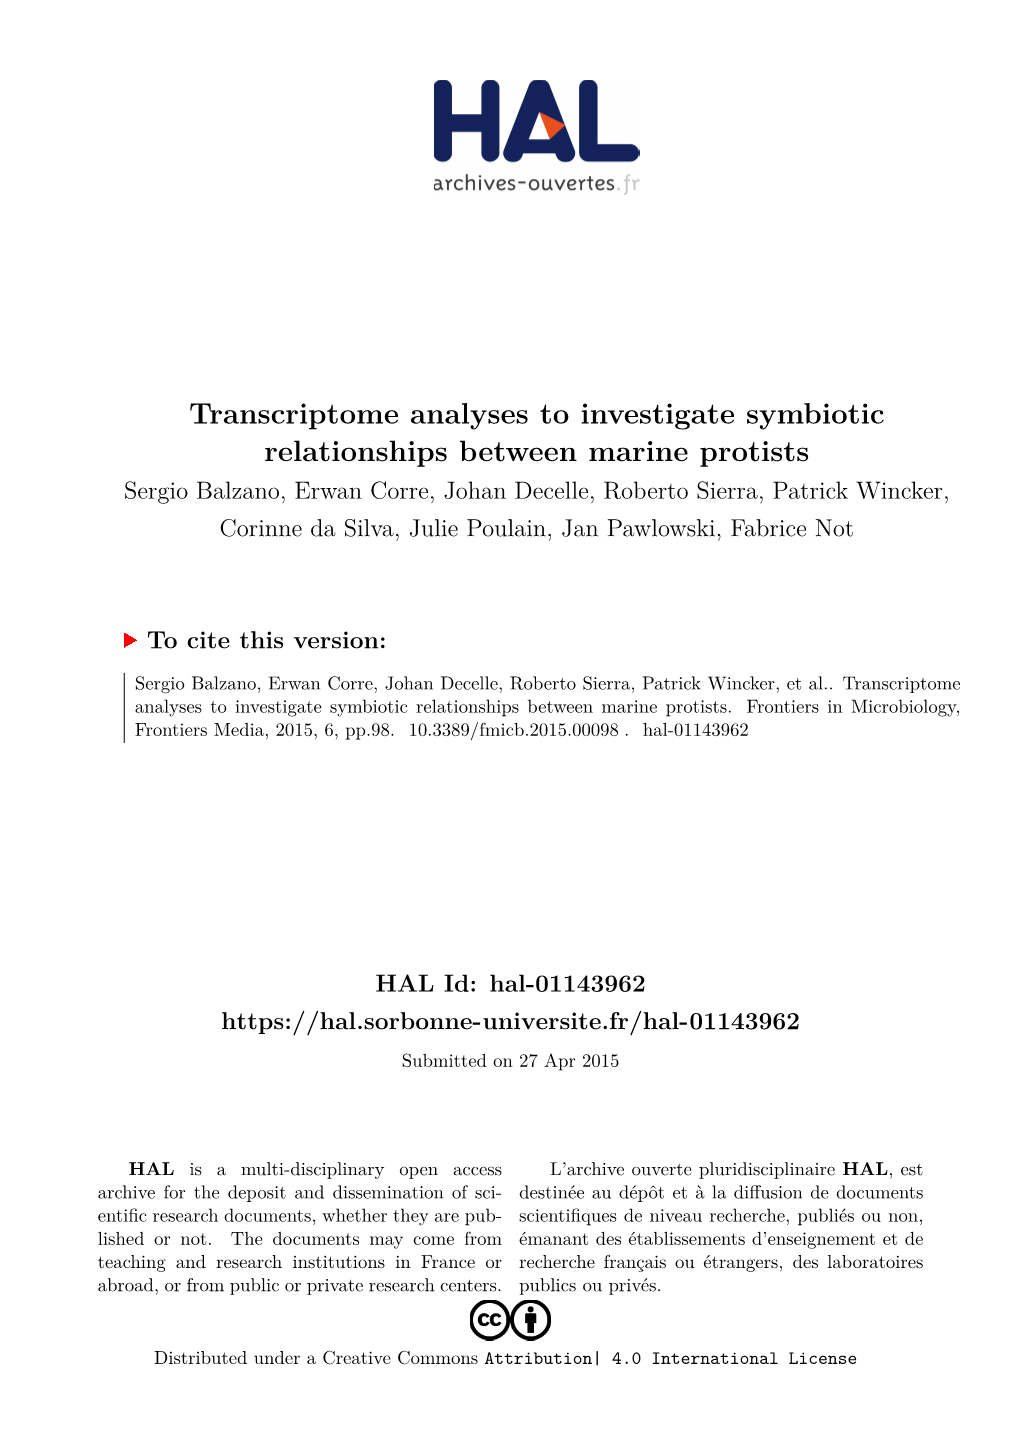 Transcriptome Analyses to Investigate Symbiotic Relationships Between